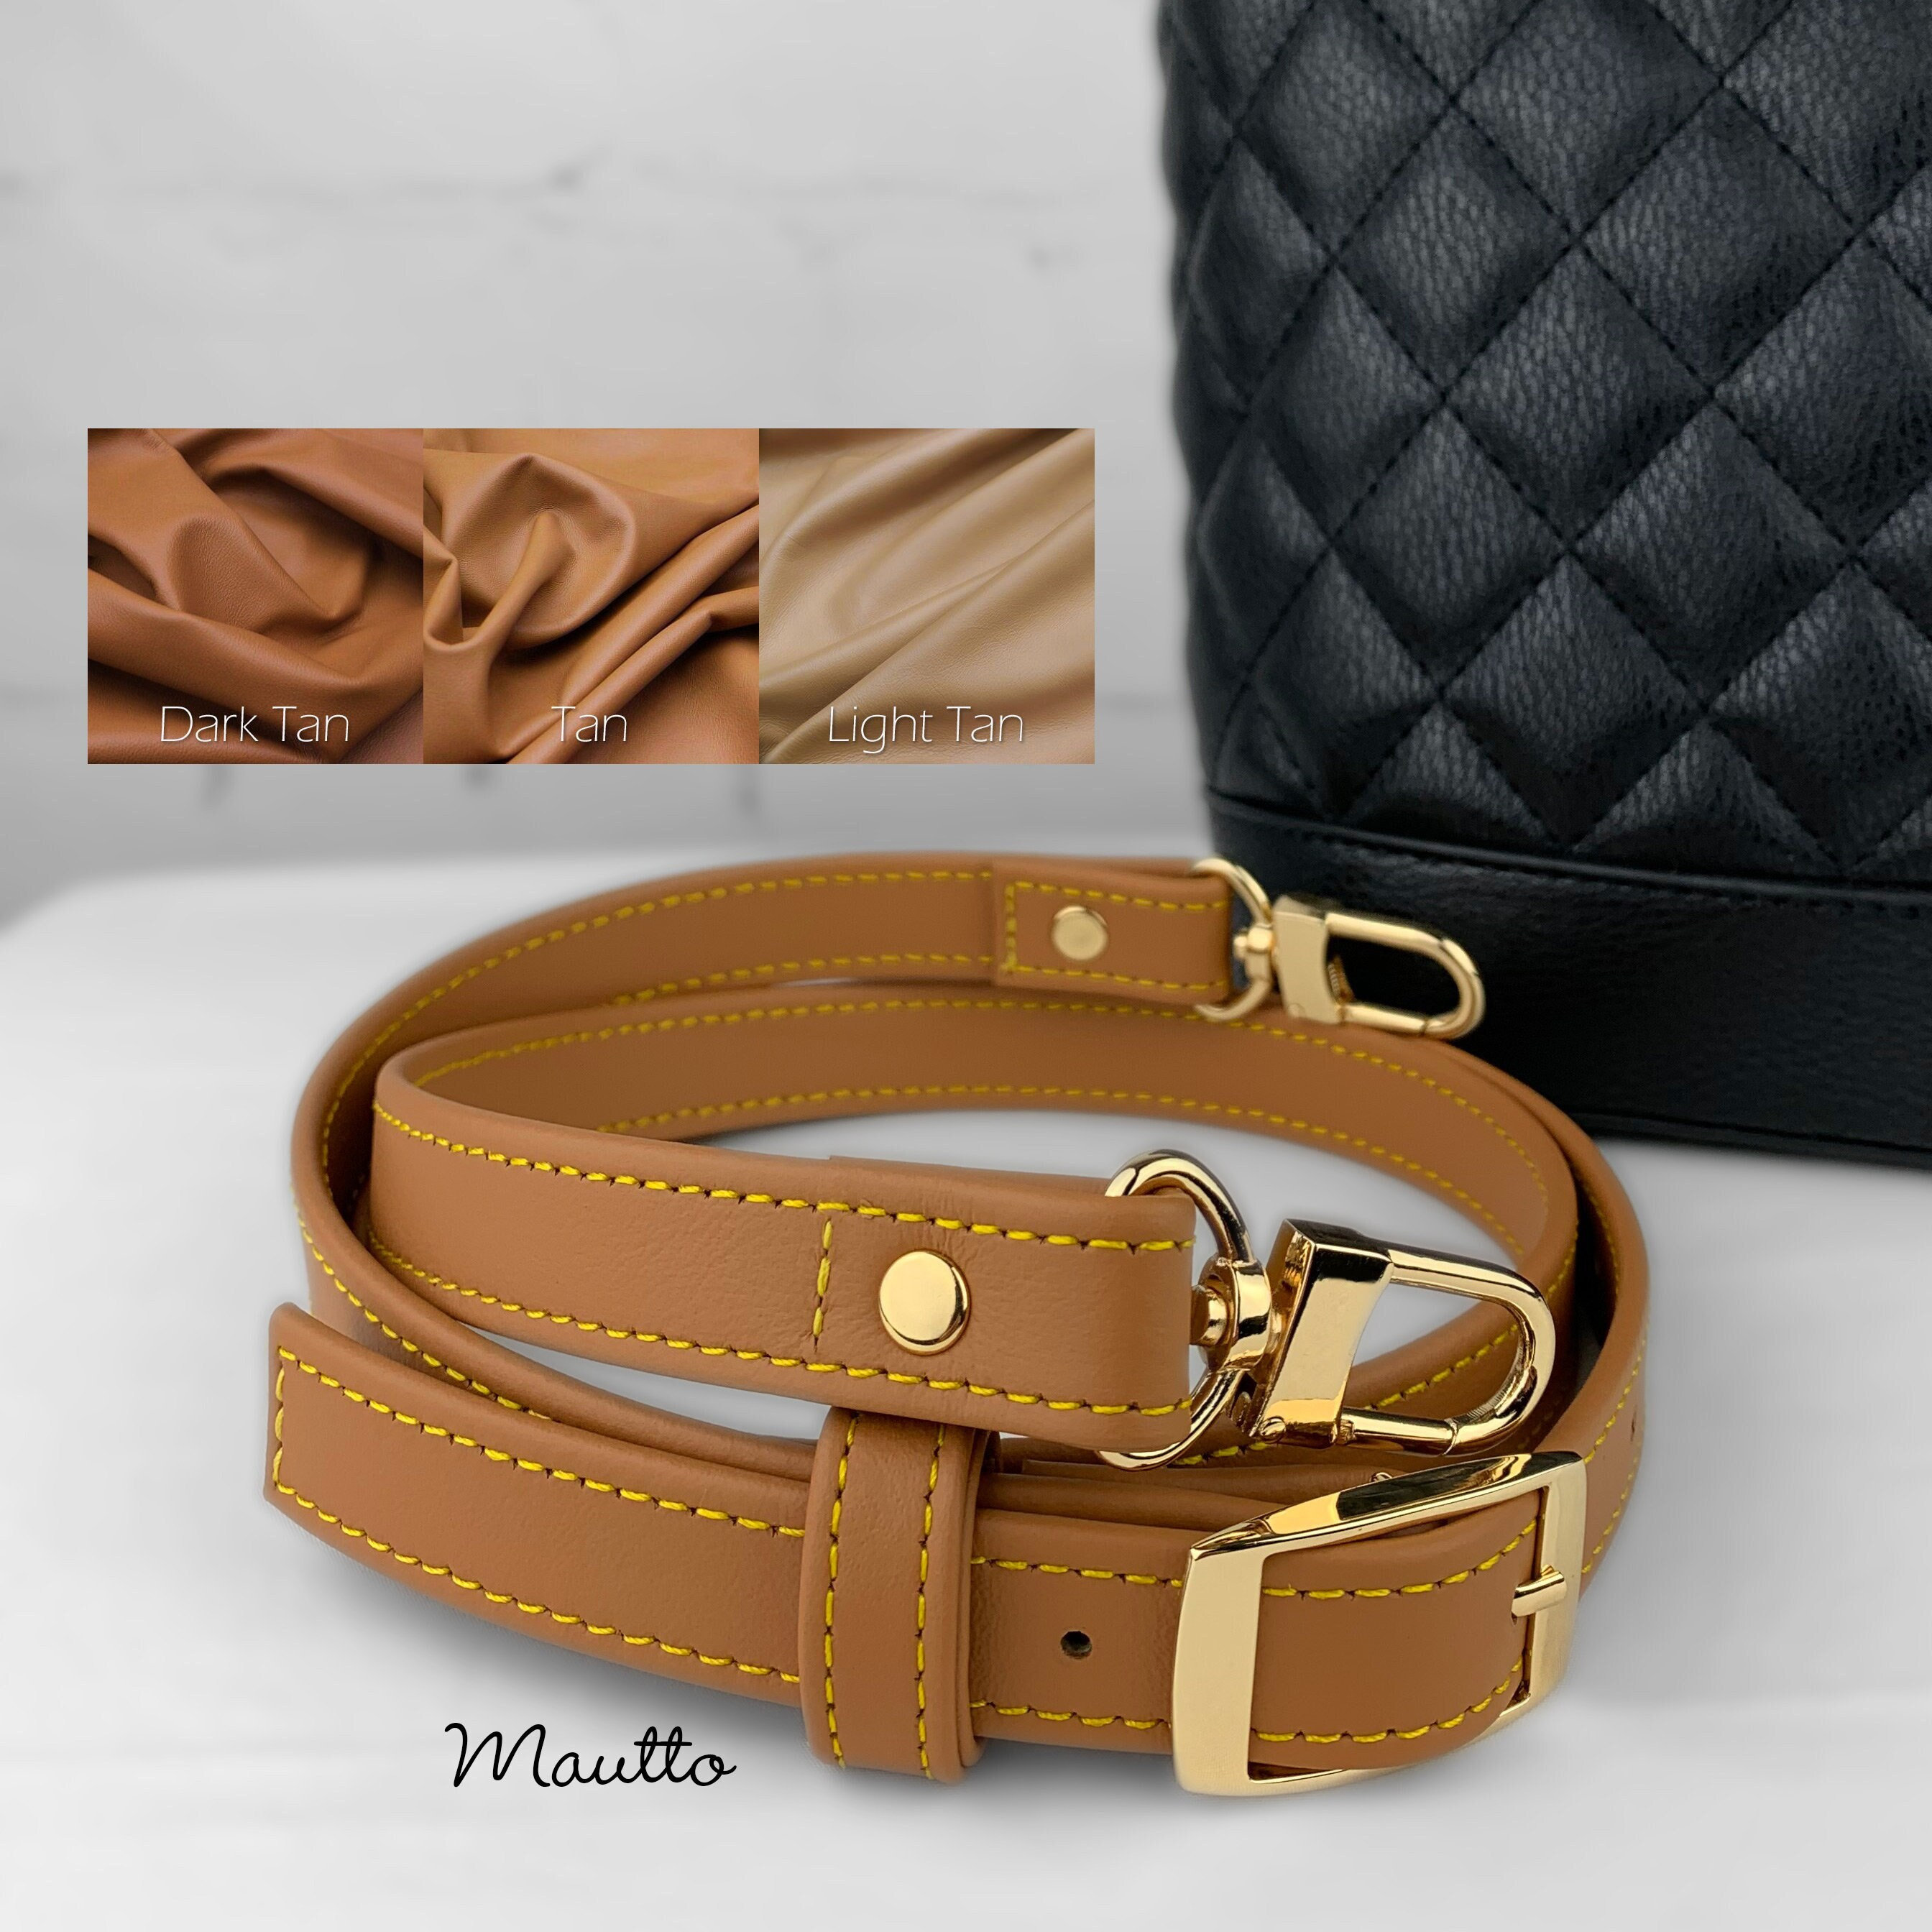 H Buckle New Luxury Brand High Quality Women's Genuine Leather 1.8